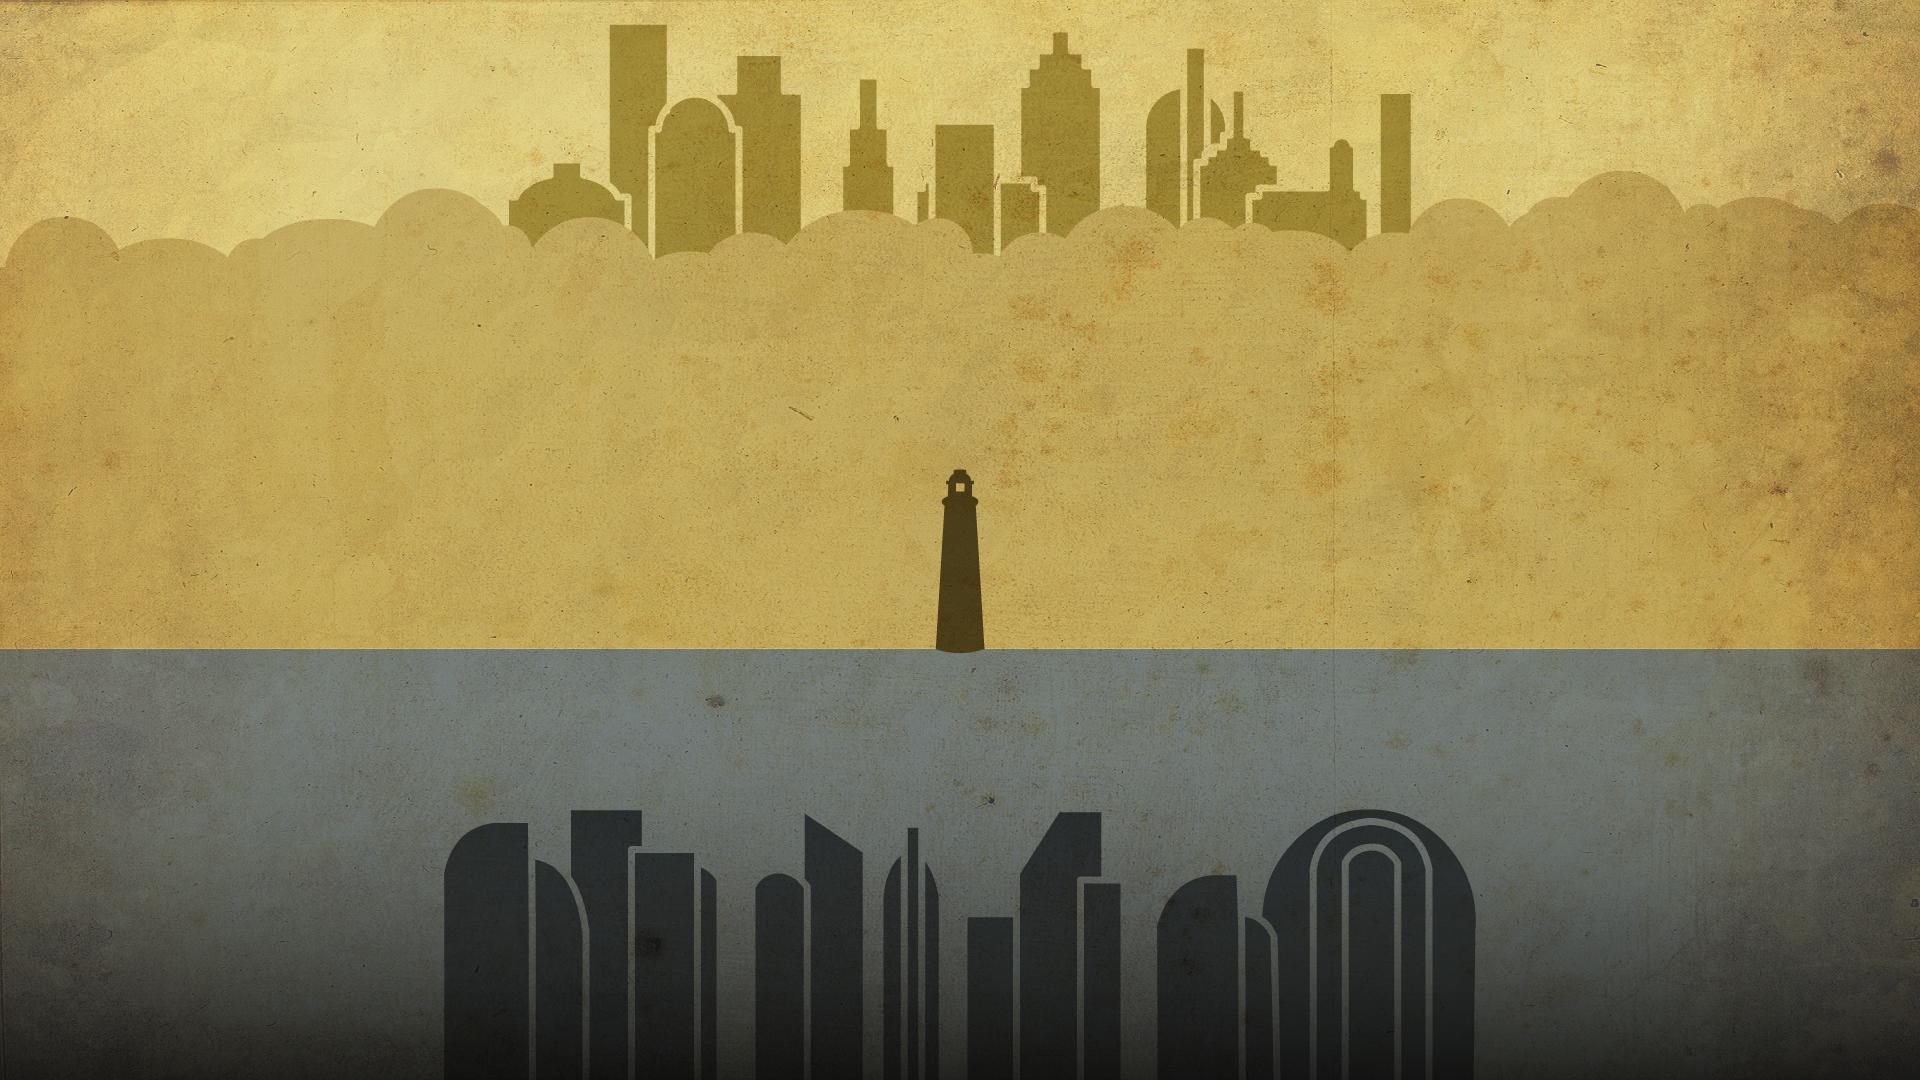 Bioshock Rapture City Wallpaper I Use This One